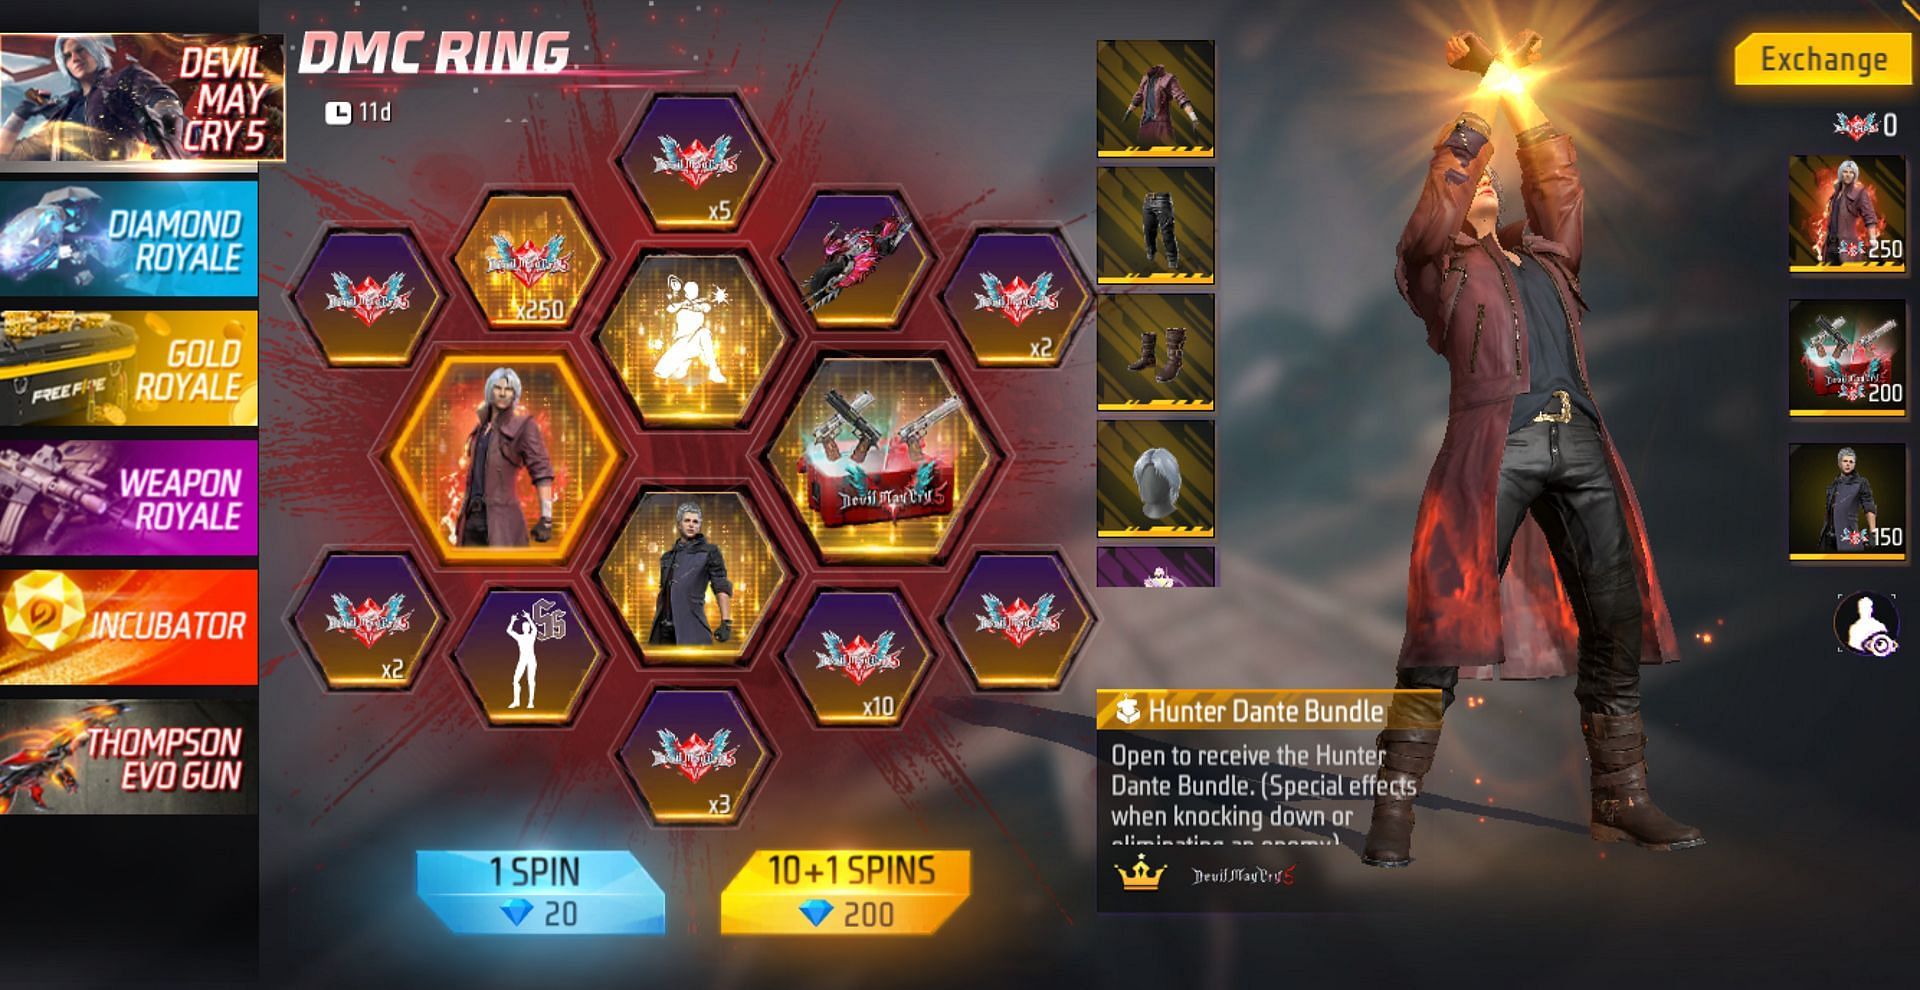 The price of spins in the current DMC Ring (Image via Garena)